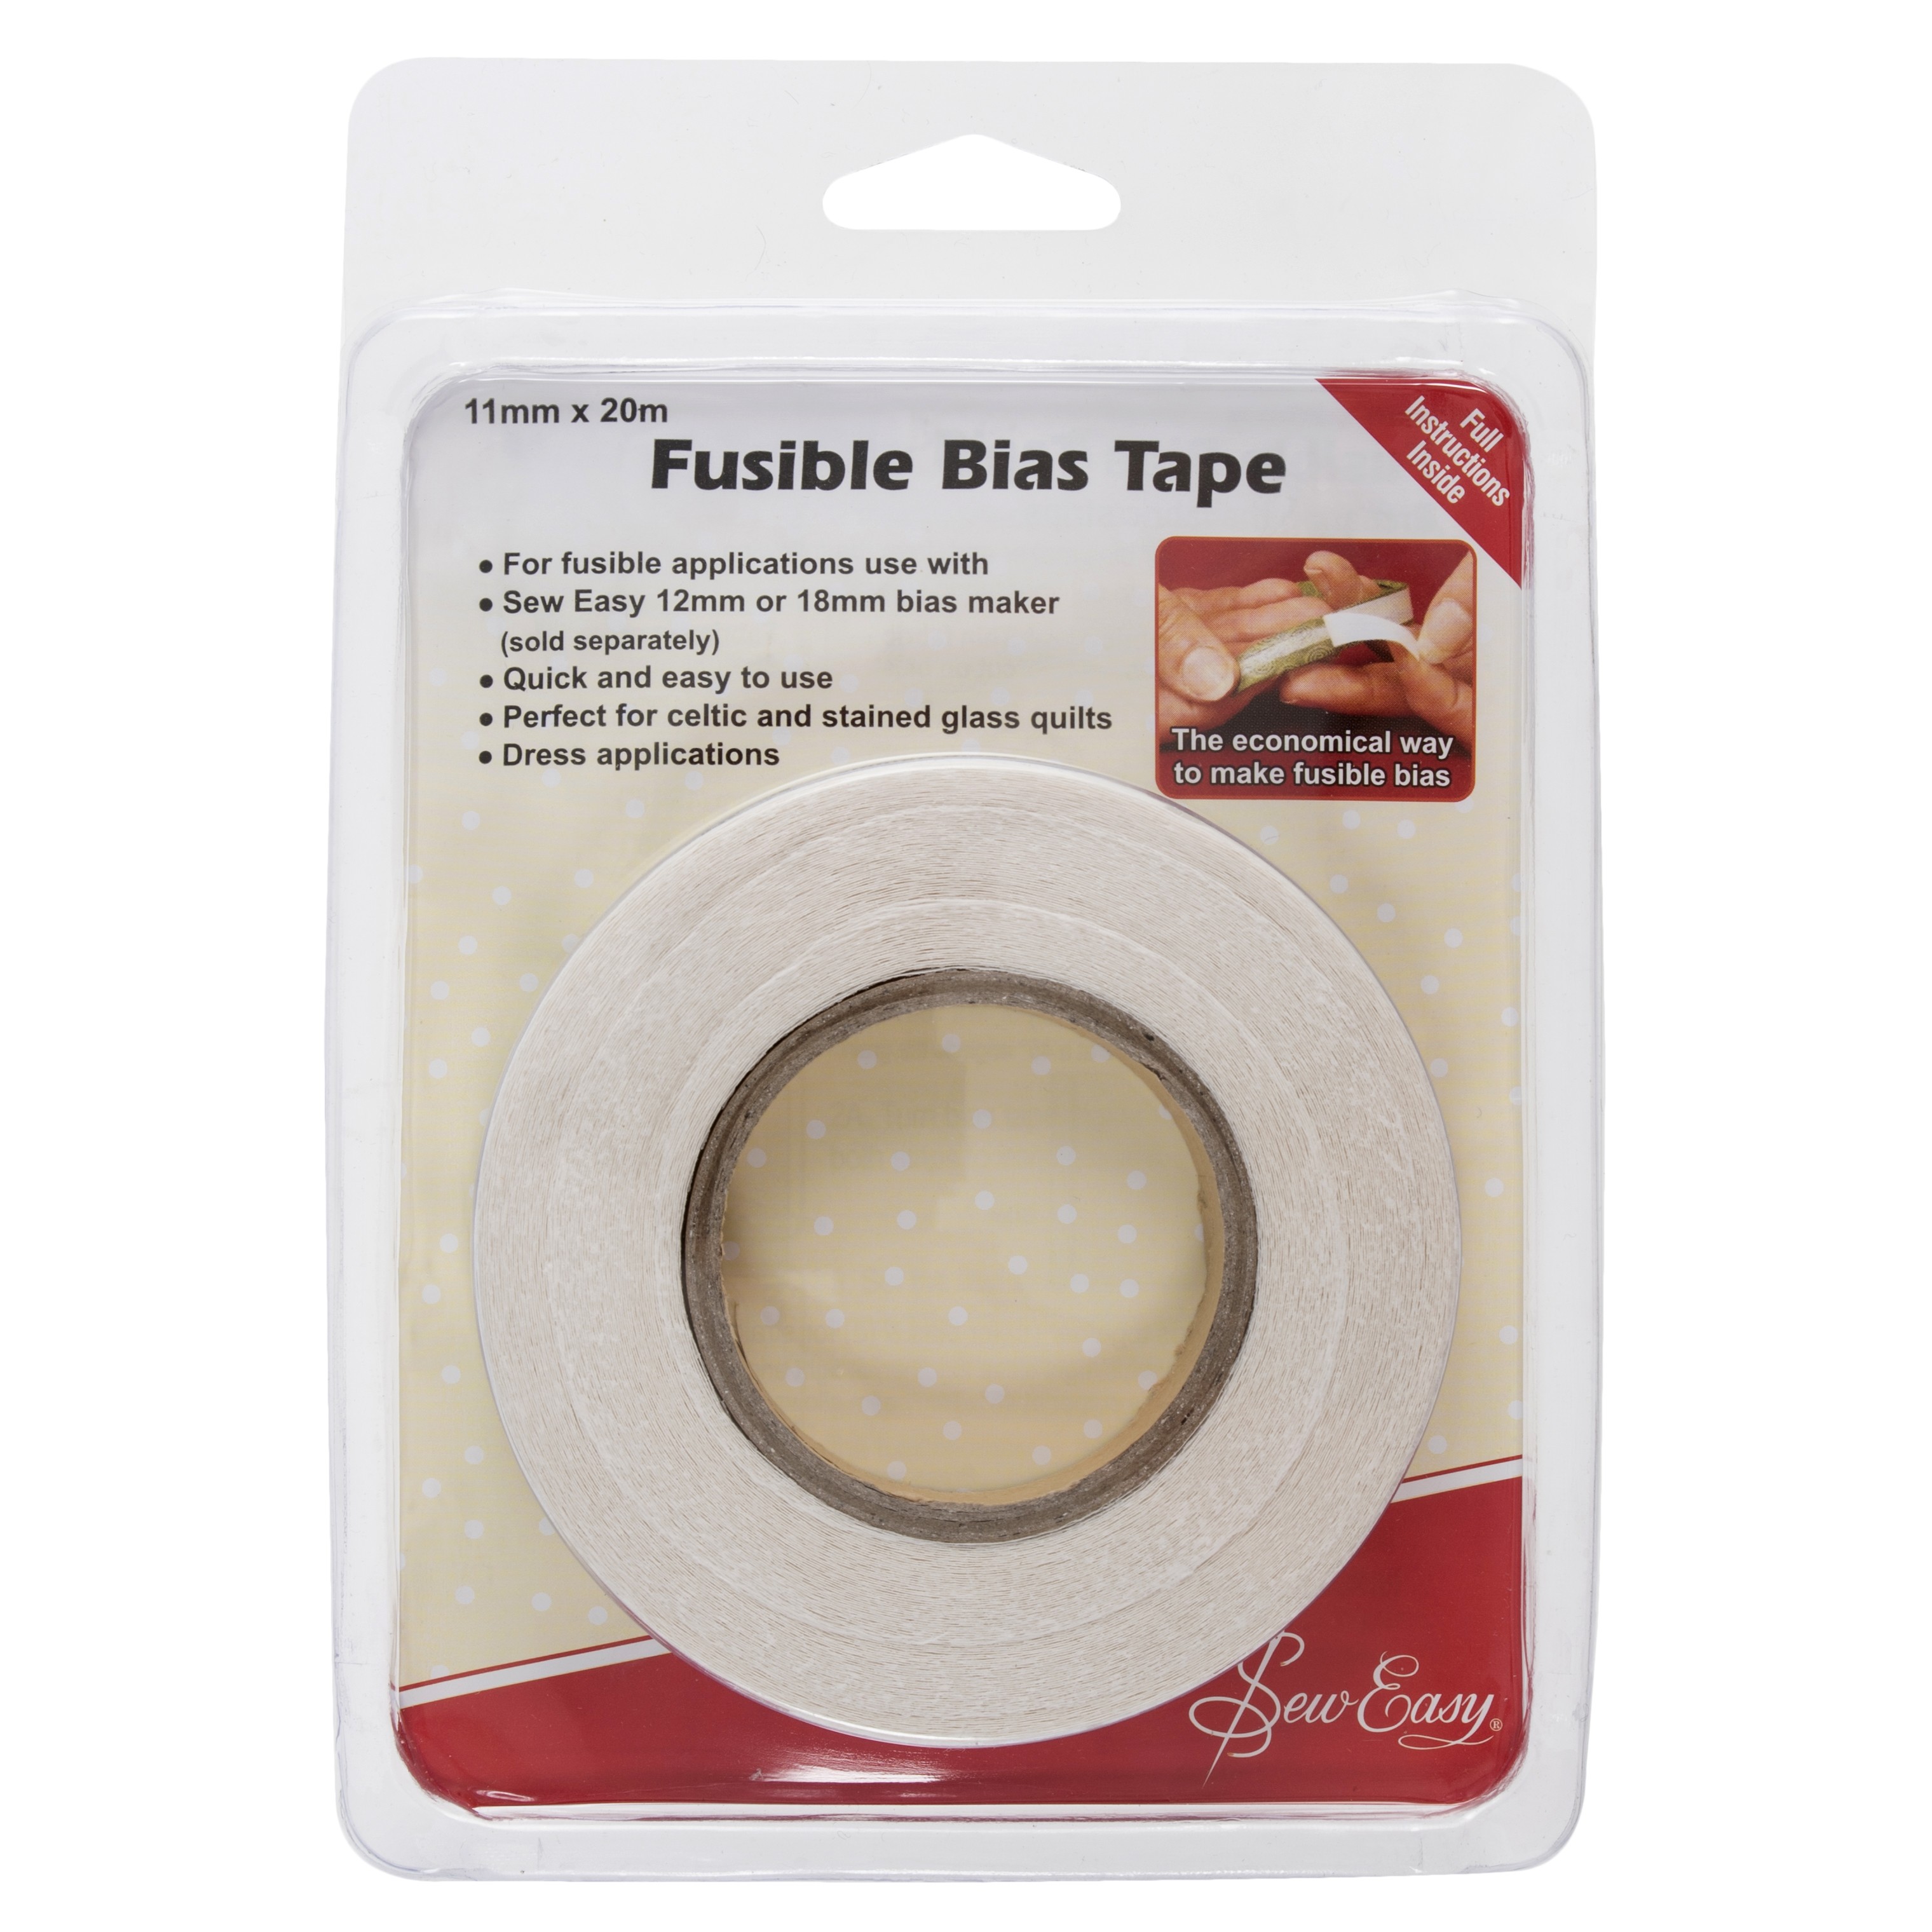 Sew Easy Fusible Bias Tape - 20m x 11mm > Bias Makers & Tapes ...